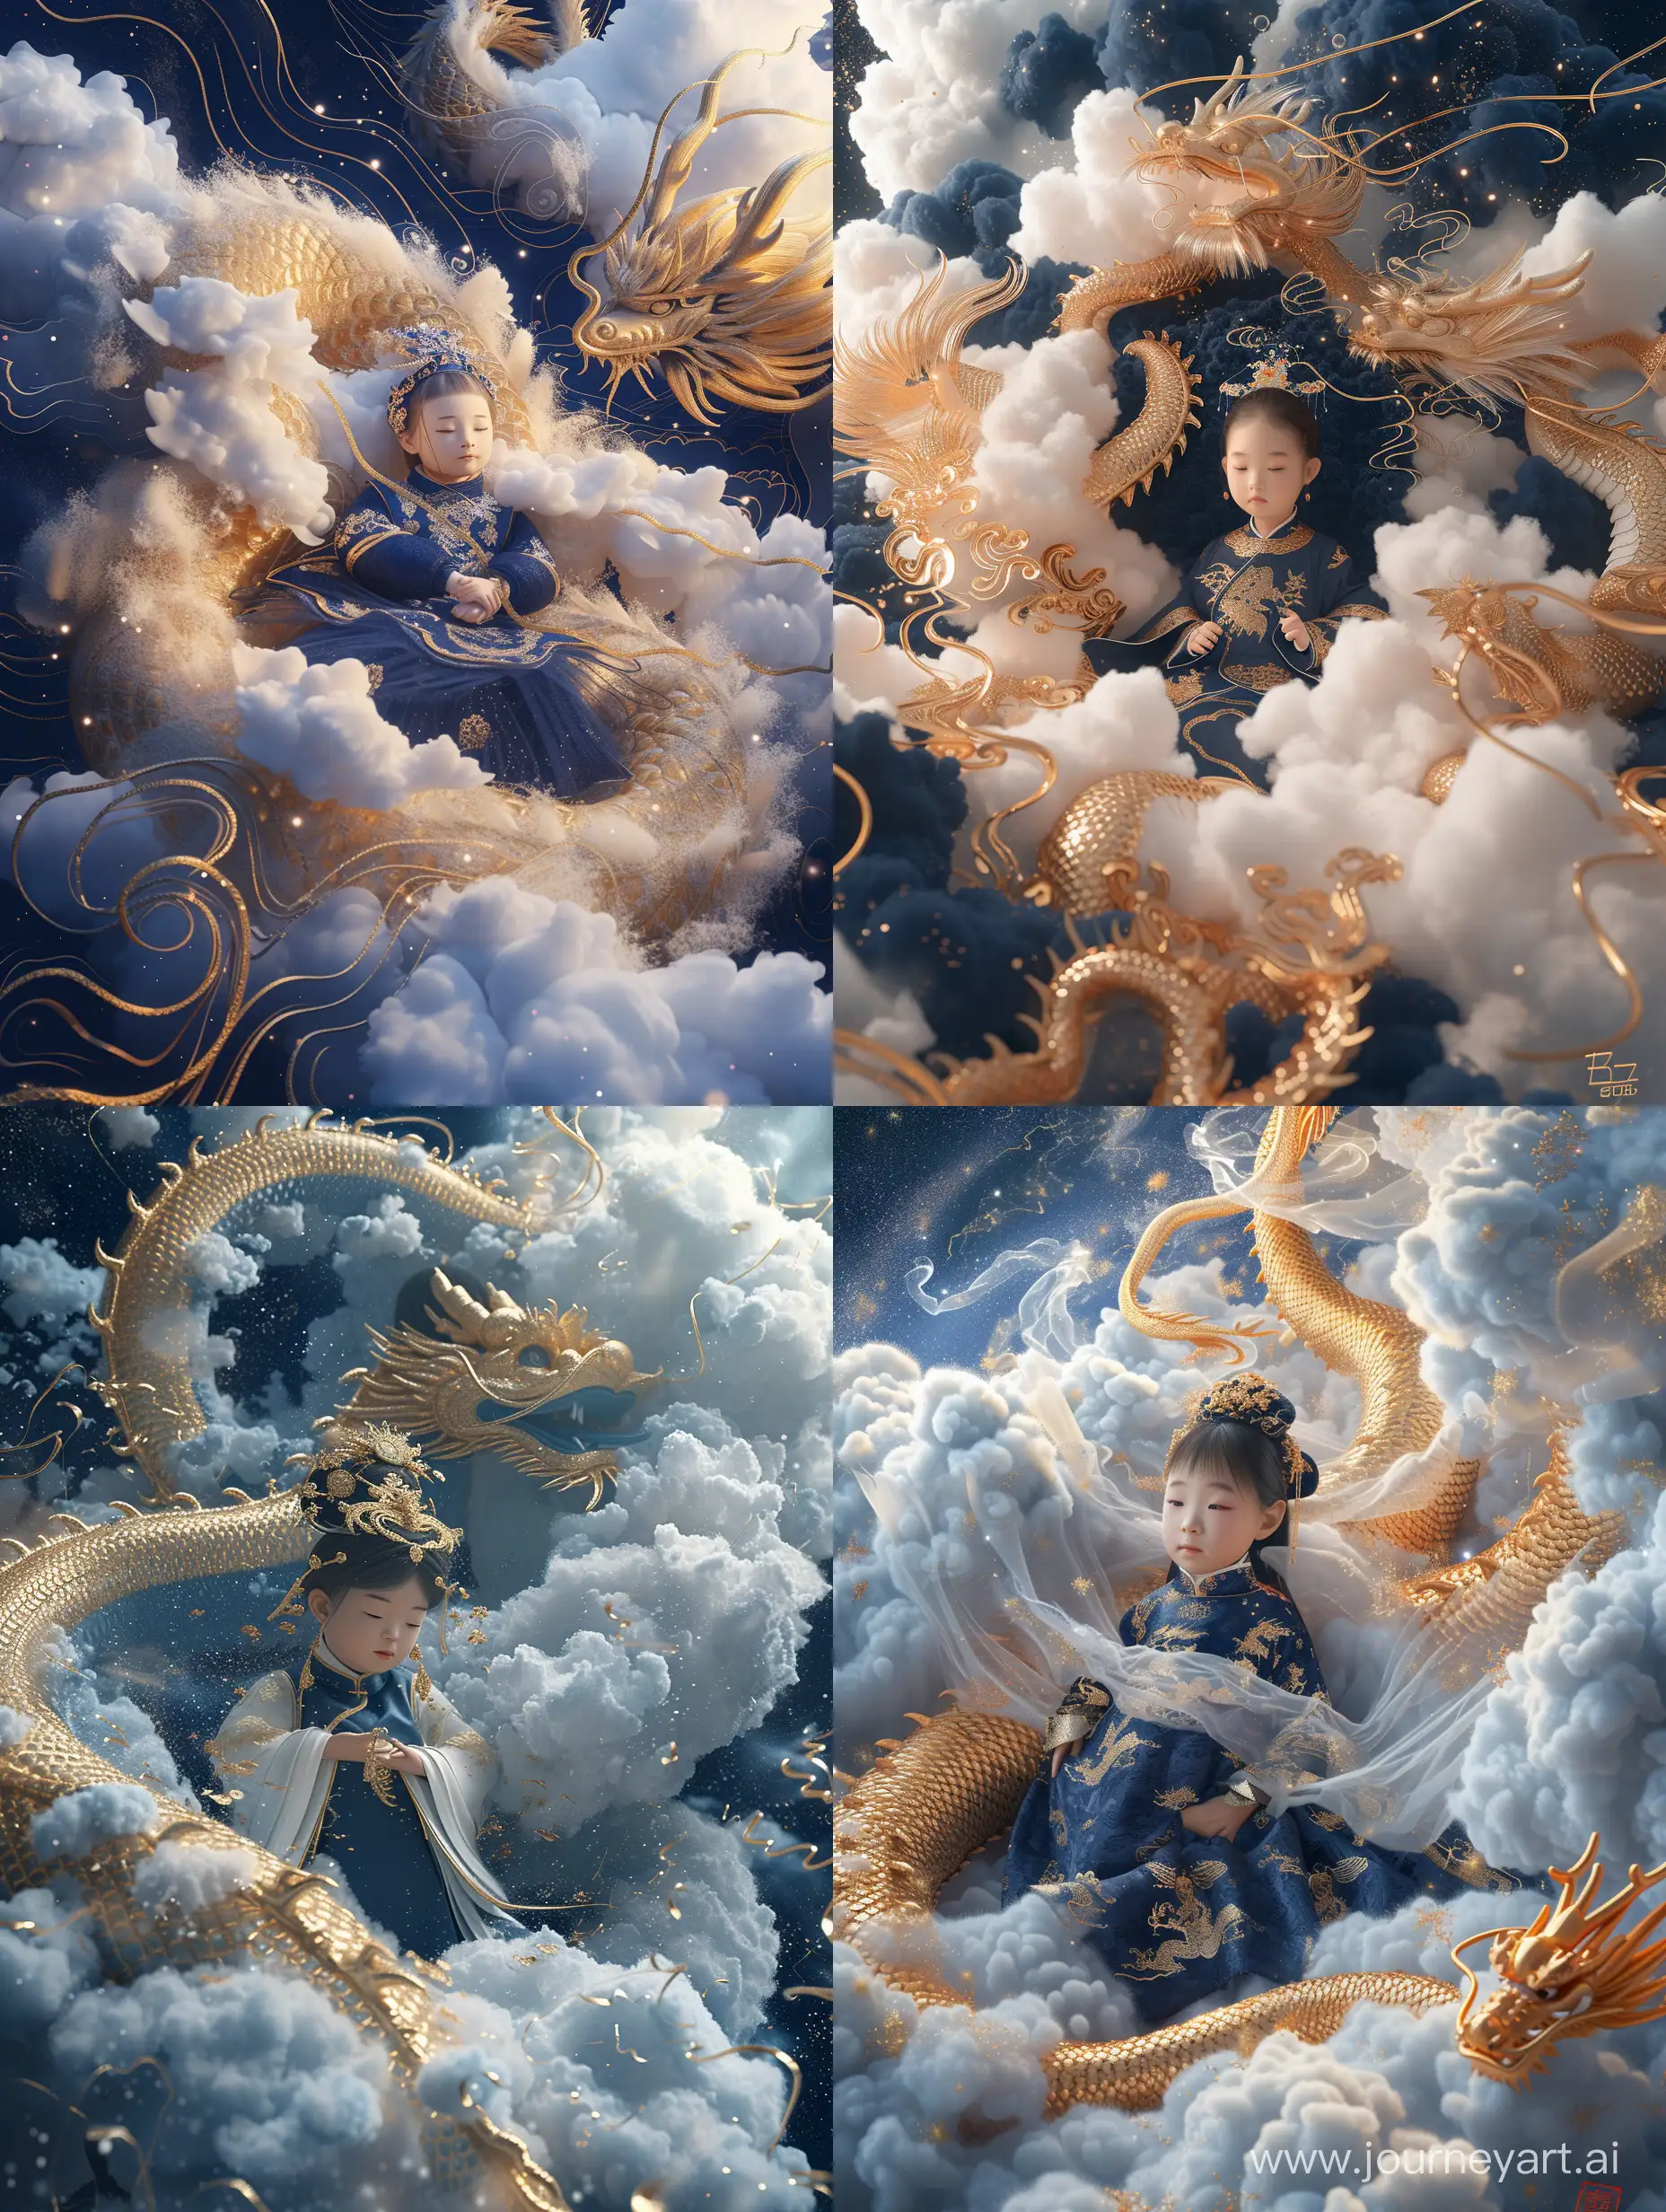 A 3-year-old girl dressed in traditional Chinese attire is surrounded by a celestial Chinese dragon resting on clouds. The scene is depicted in a mesmerizing color palette of navy blue and gold, with a touch of translucency and swirling textures reminiscent of cosmic art. The artwork is meticulously crafted, incorporating elements of anime aesthetics and fuzzy textures, resulting in a stunning 3D C4D render. This masterpiece is presented in 8K HDR for the best quality and showcases an ethereal portrait.